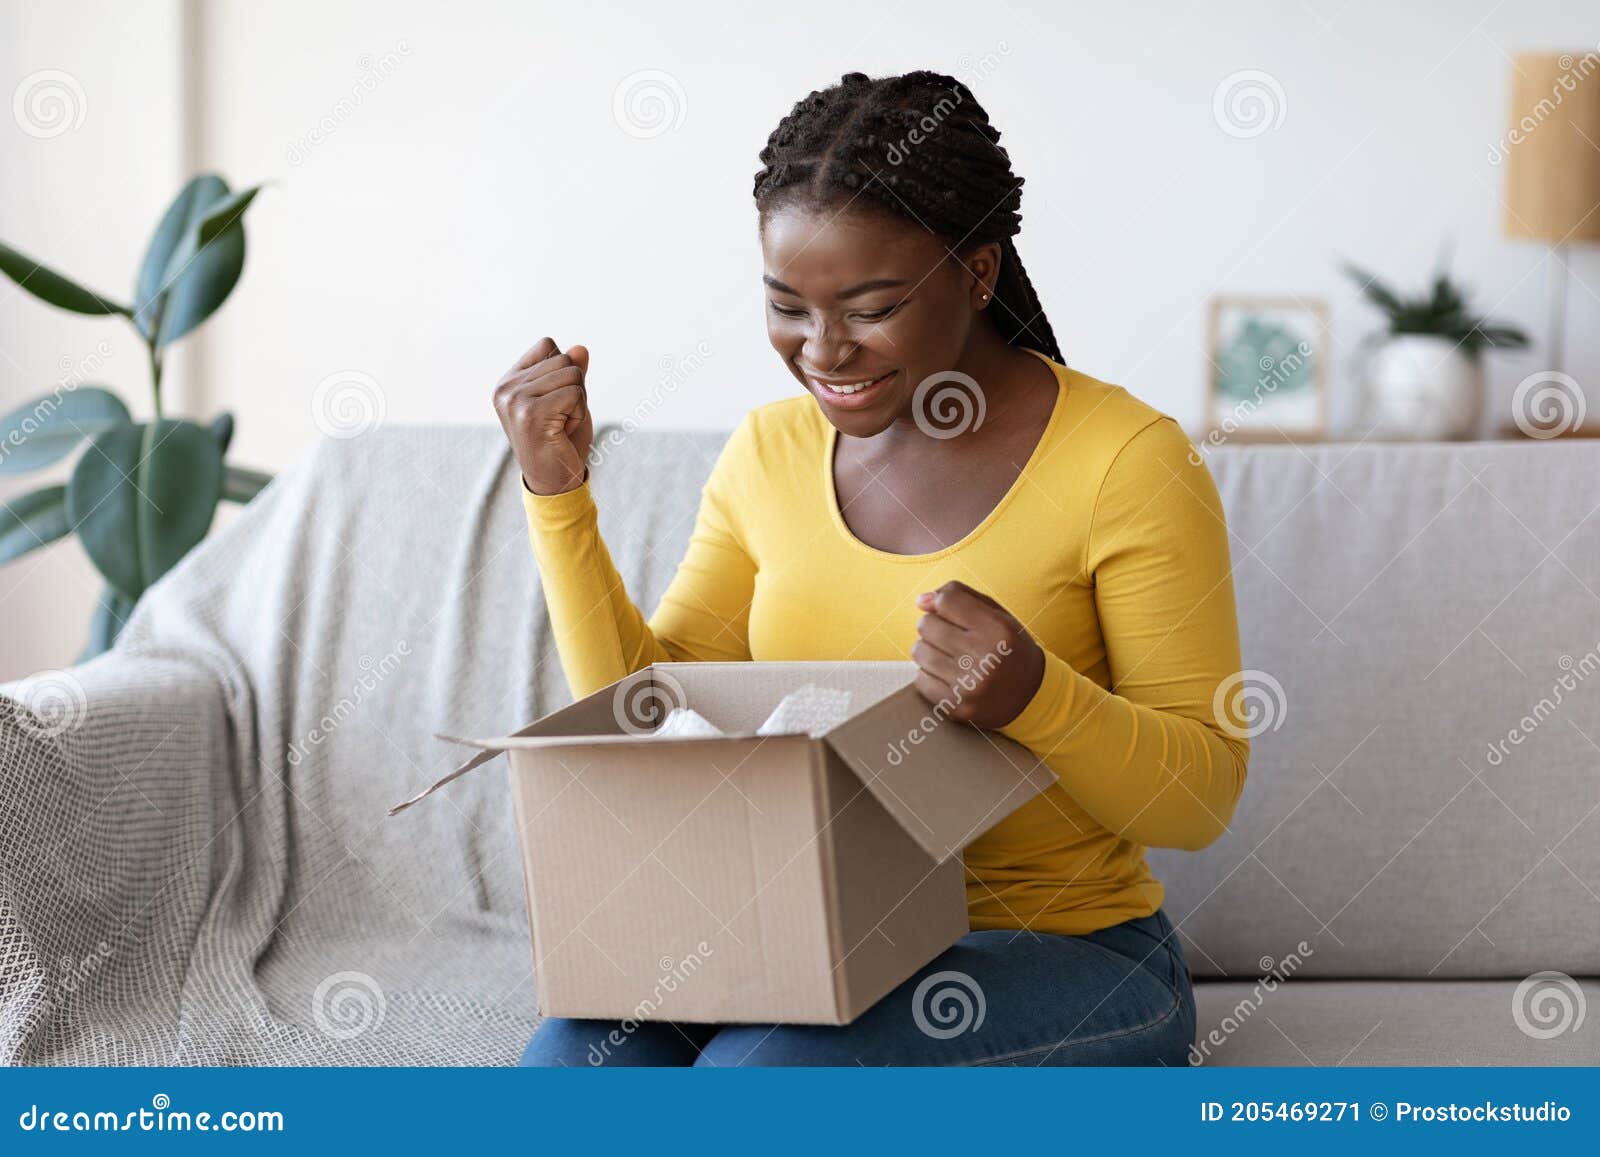 happy black woman unboxing parcel at home, emotionally reacting to successful shopping